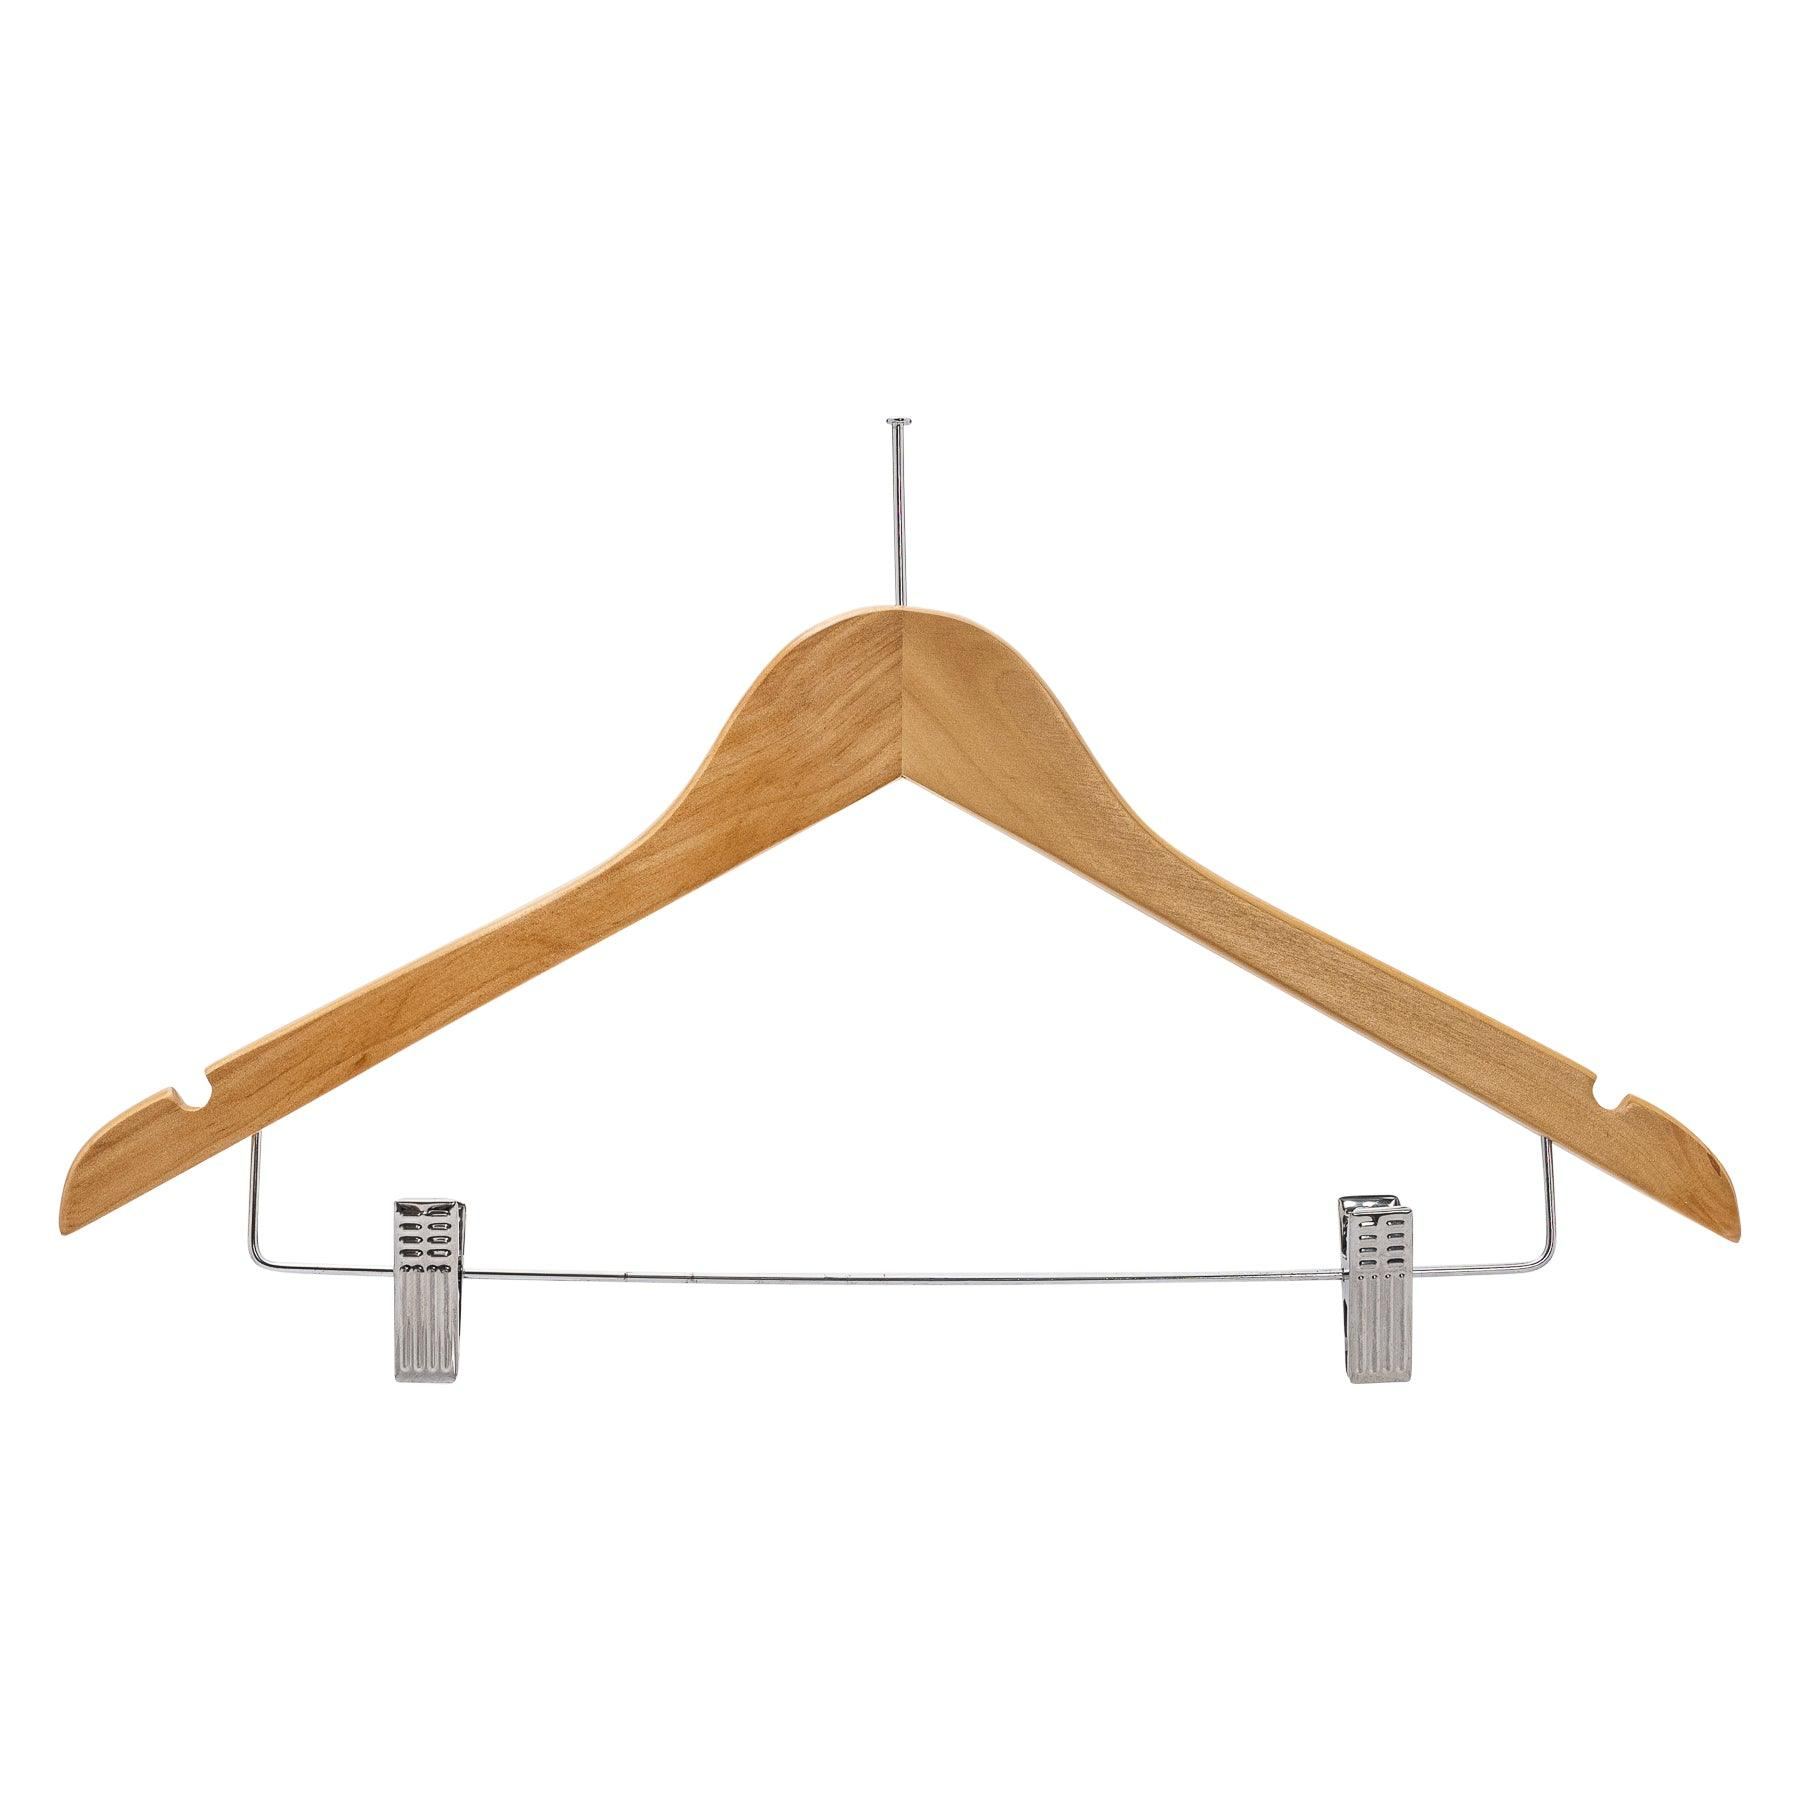 Natural Wooden Anti-Theft Hanger w/Clips - 43cm X 12mm thick  (Sold in 25/50/100) - Hangersforless